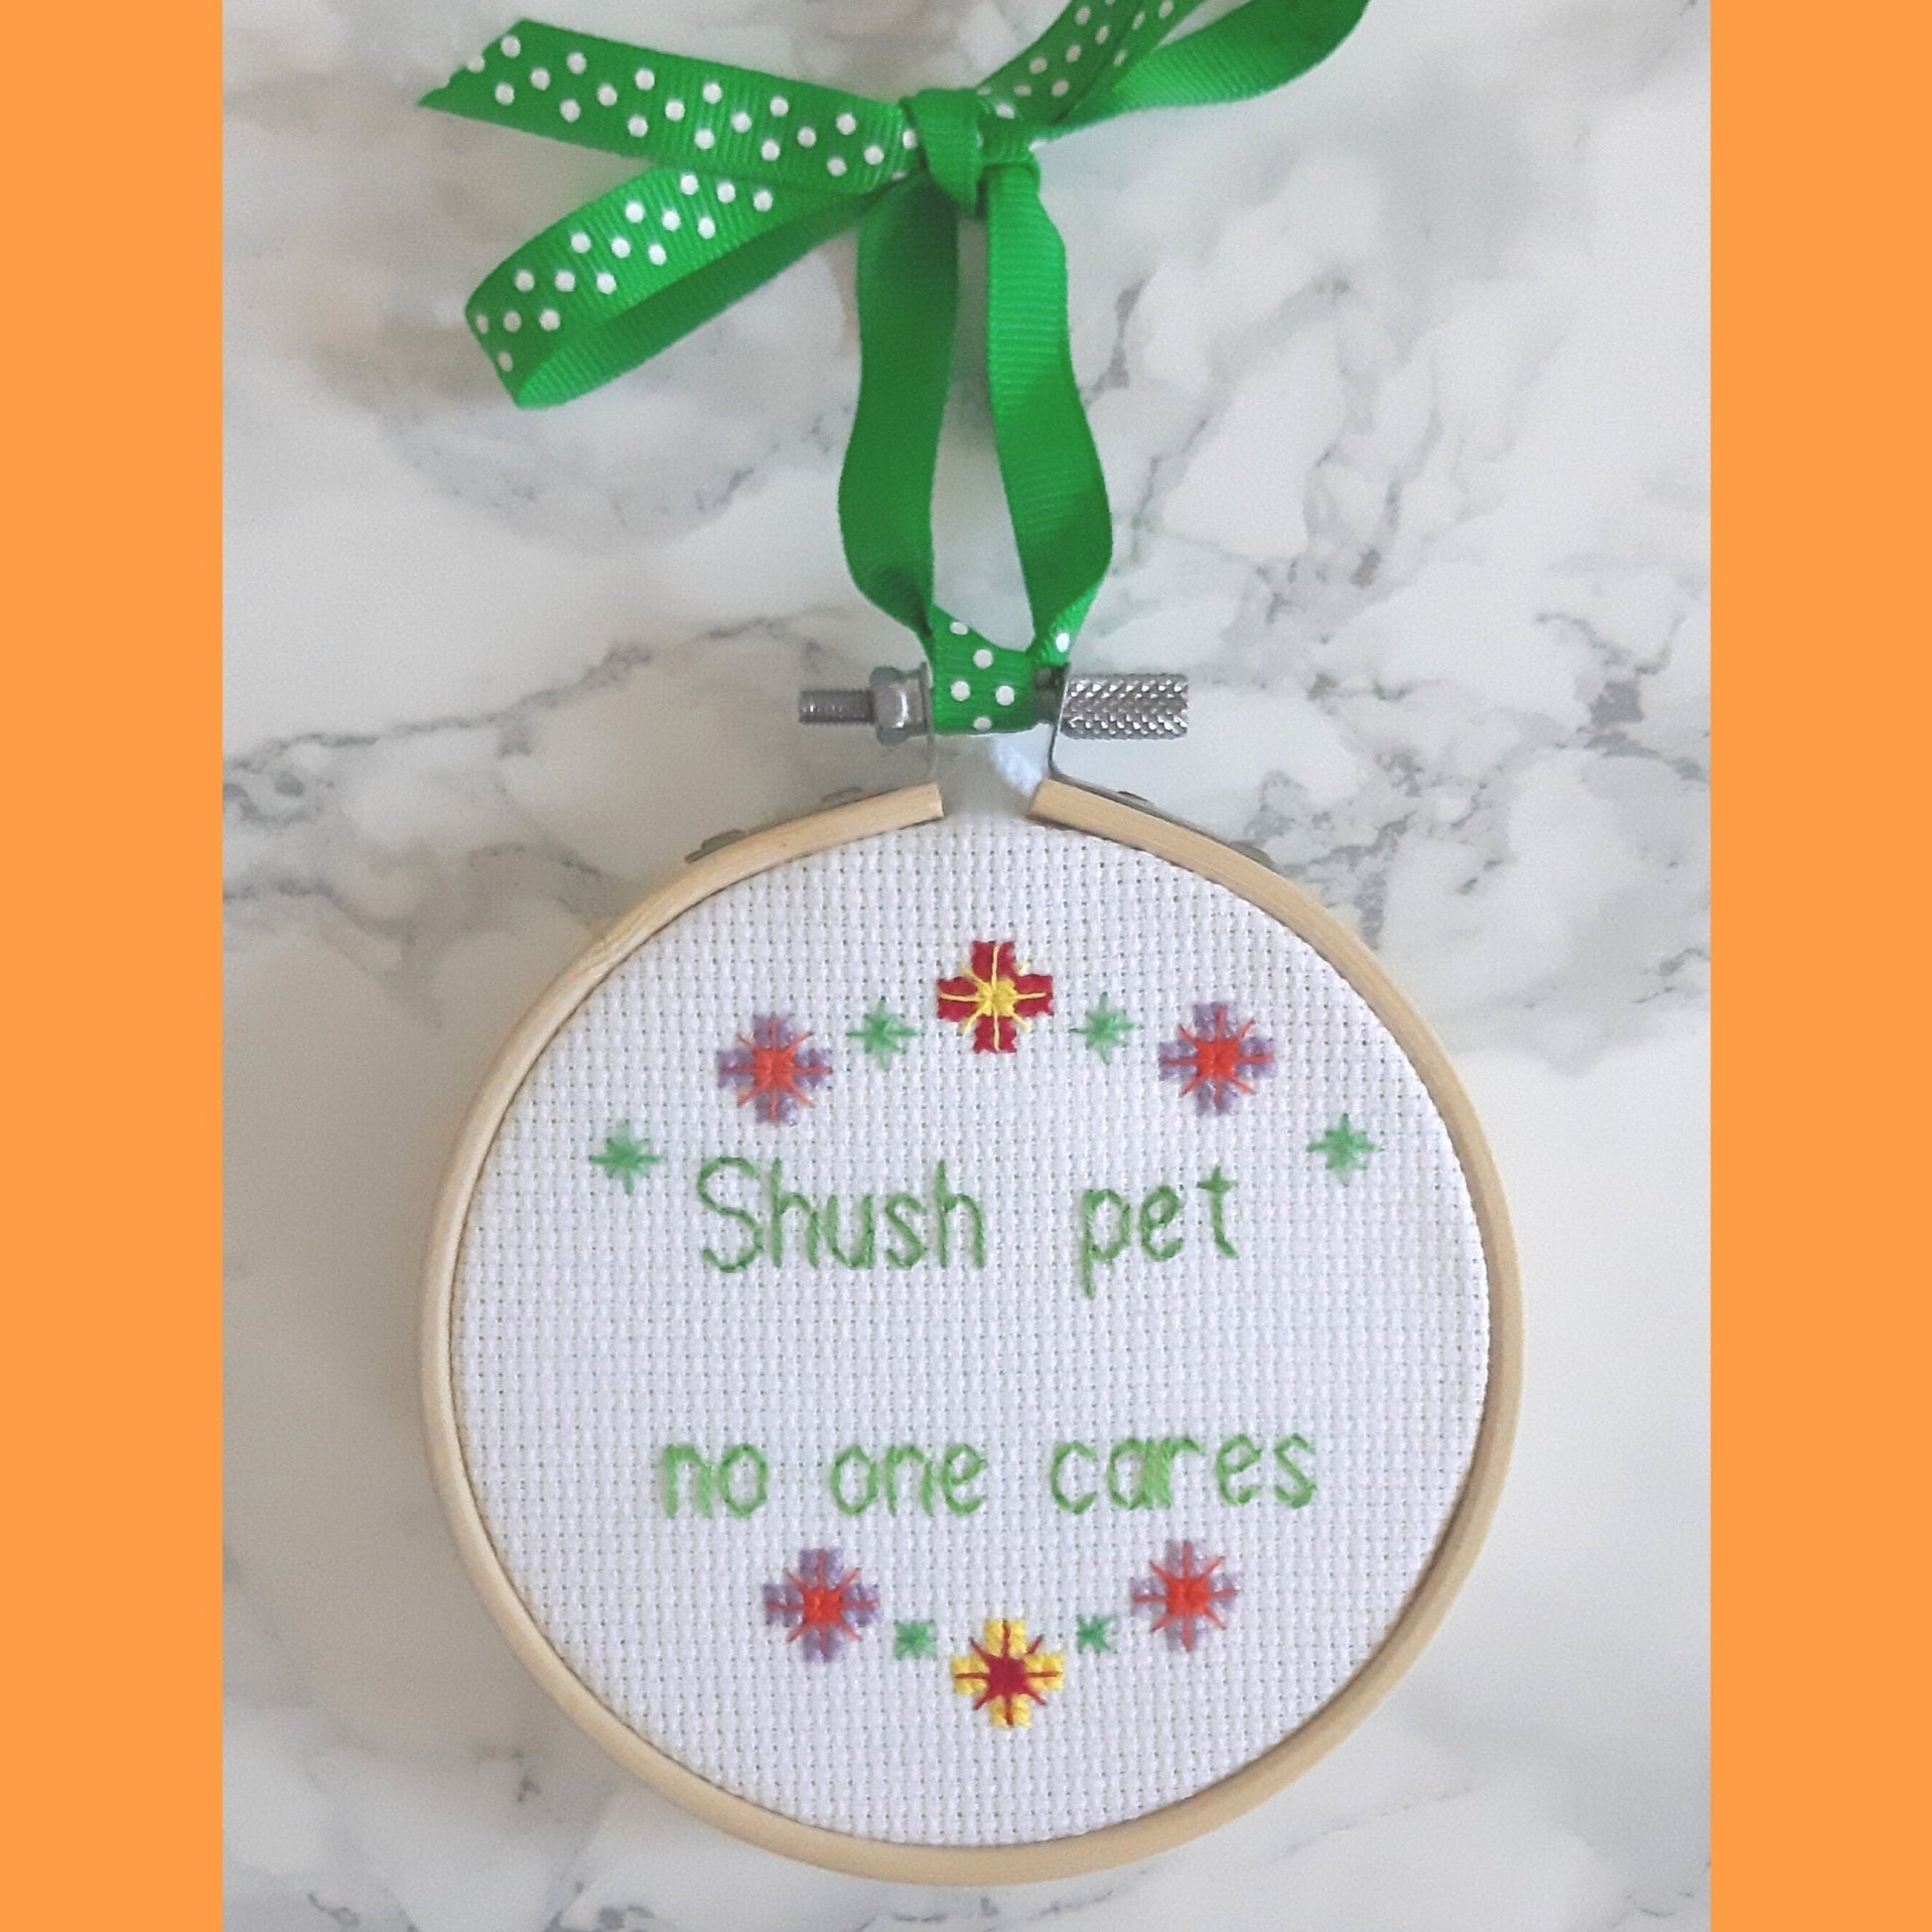 Shush pet no one cares, completed cross stitch quote - Thistleflat Crafts